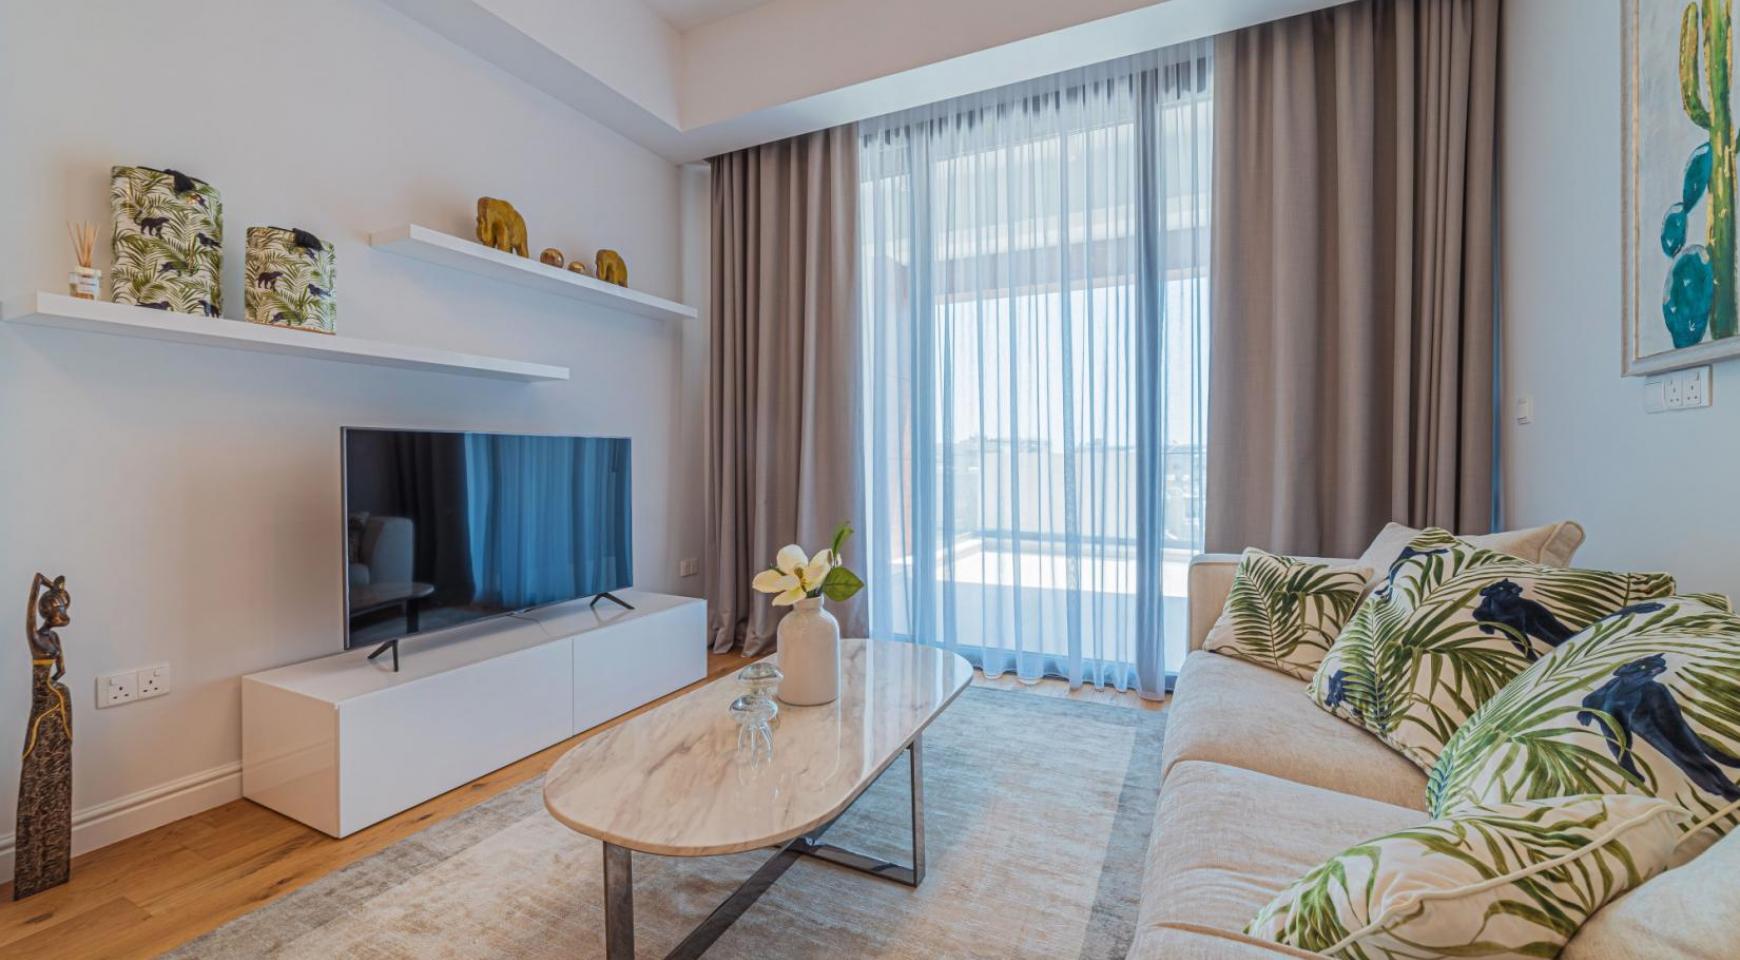 Hortensia Residence, Apt. 301. 2 Bedroom Apartment within a New Complex near the Sea  - 50